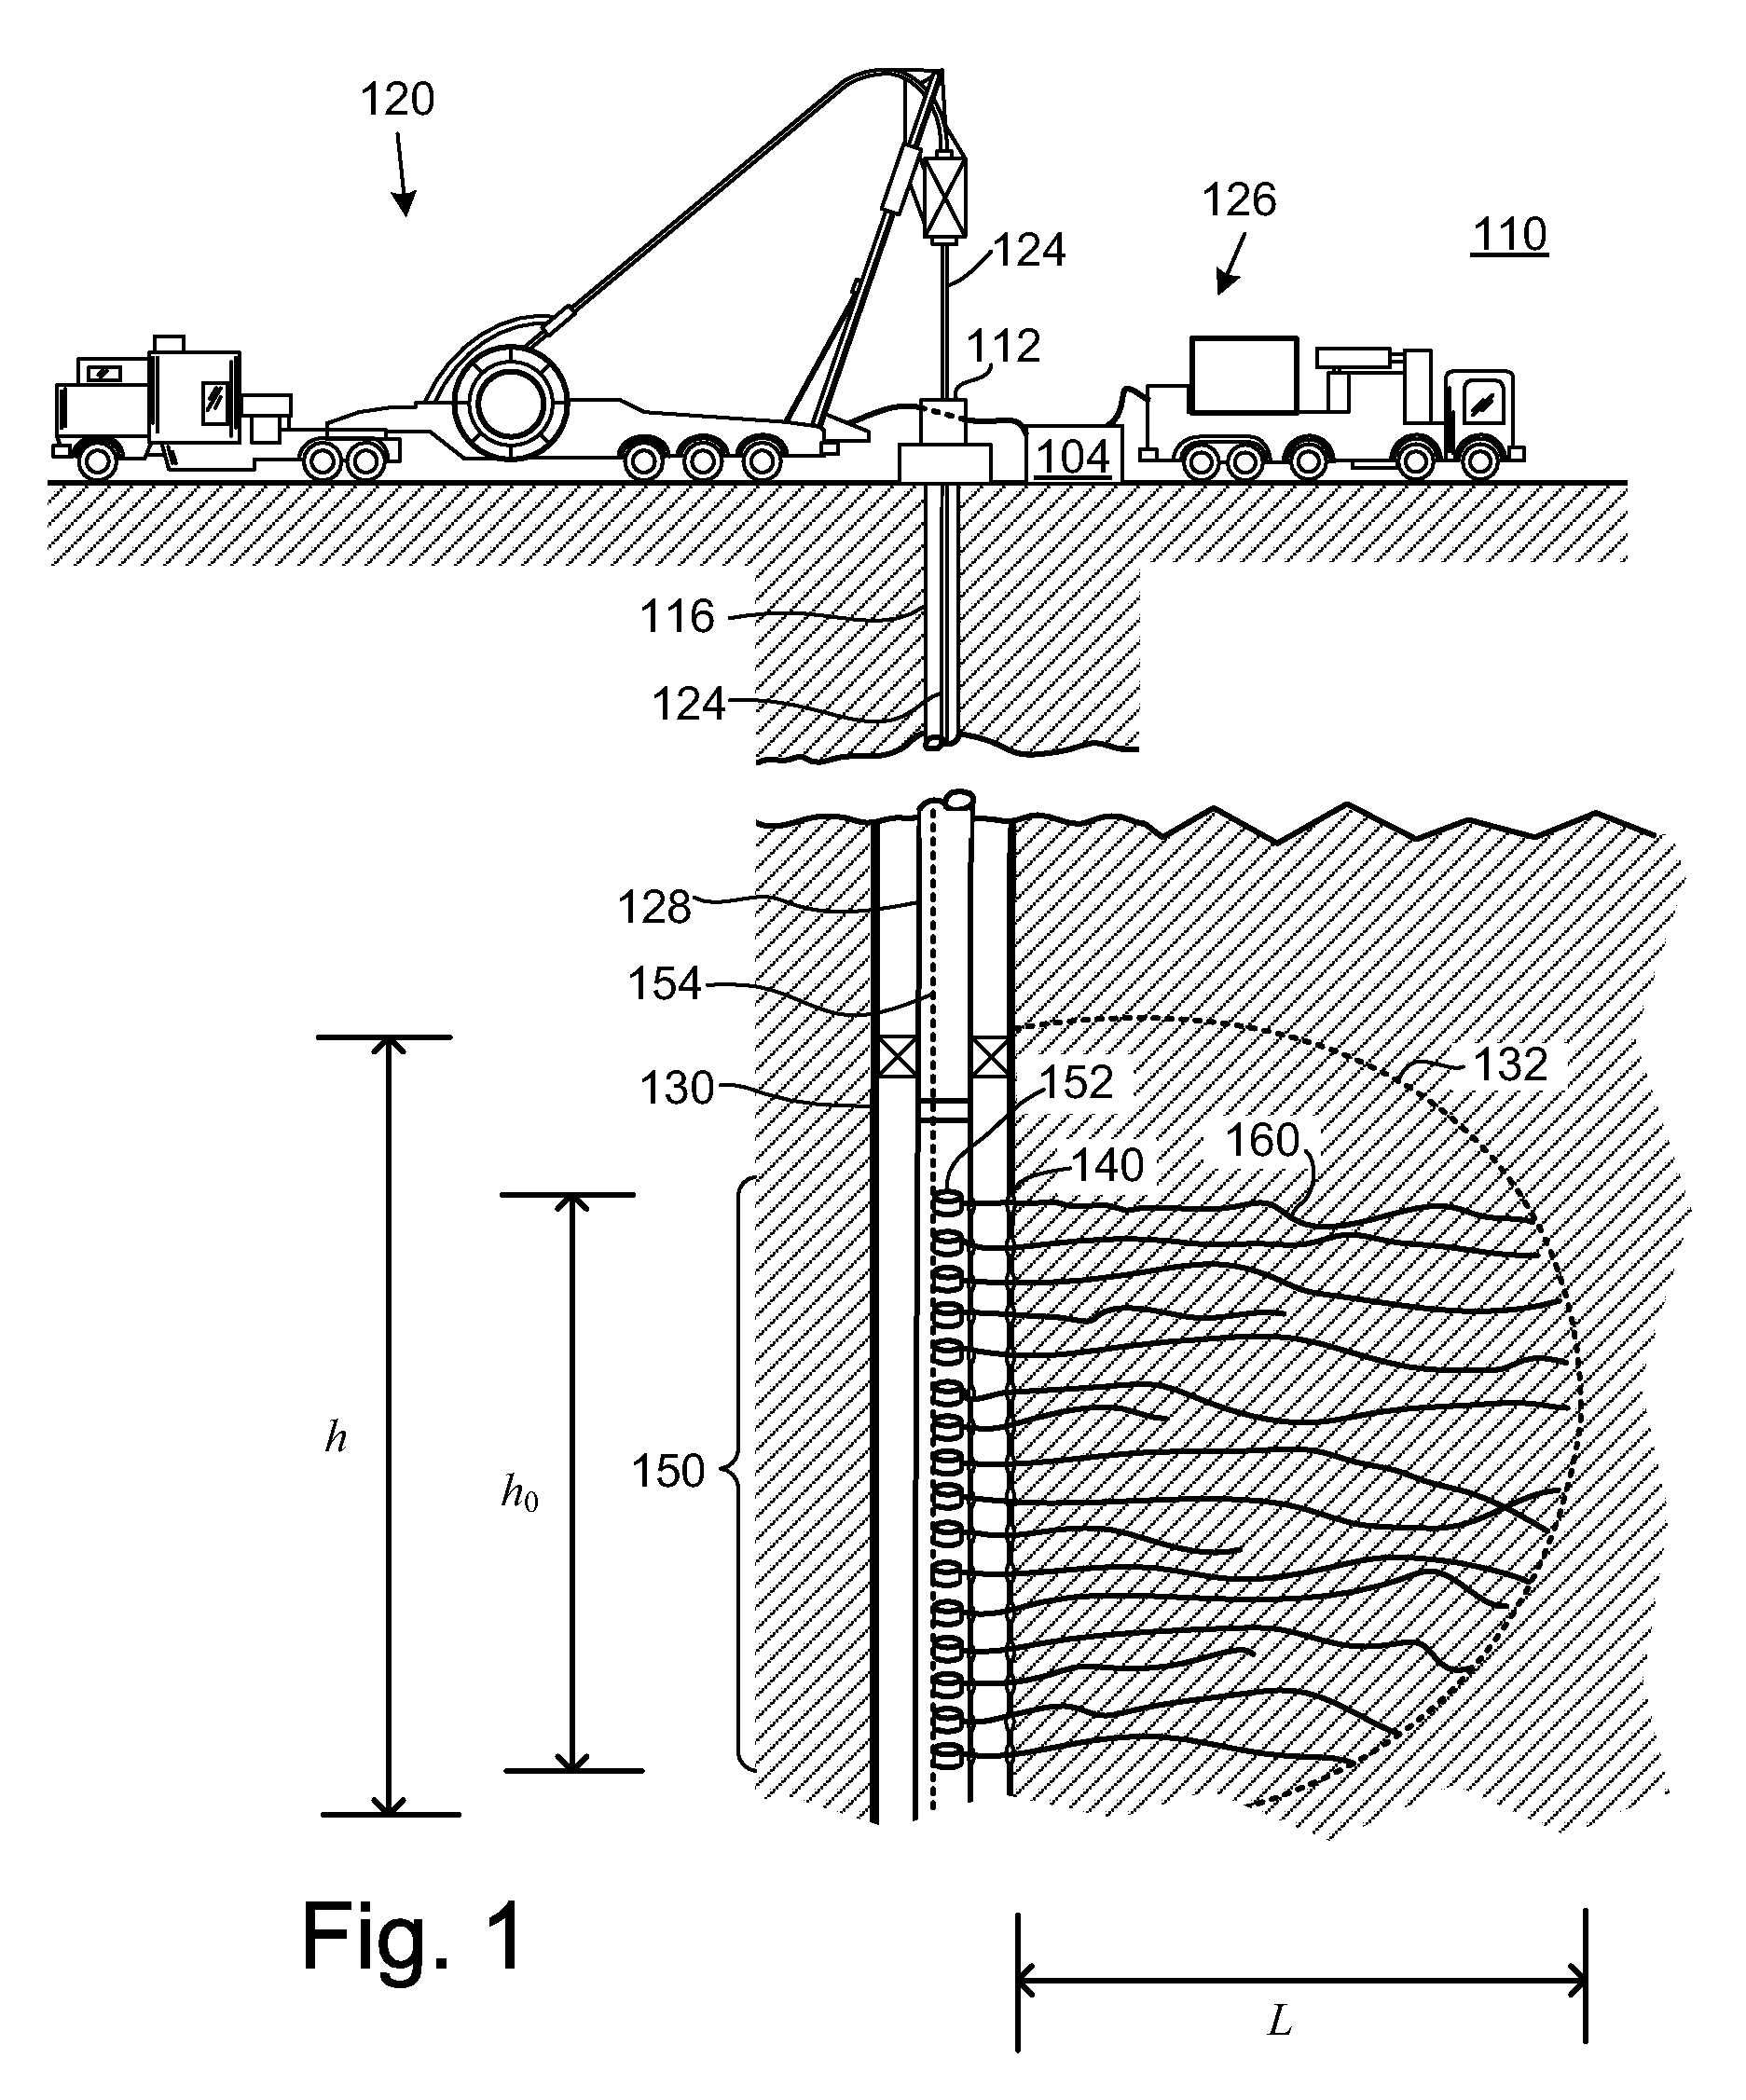 Continuous fibers for use in well completion, intervention, and other subterranean applications